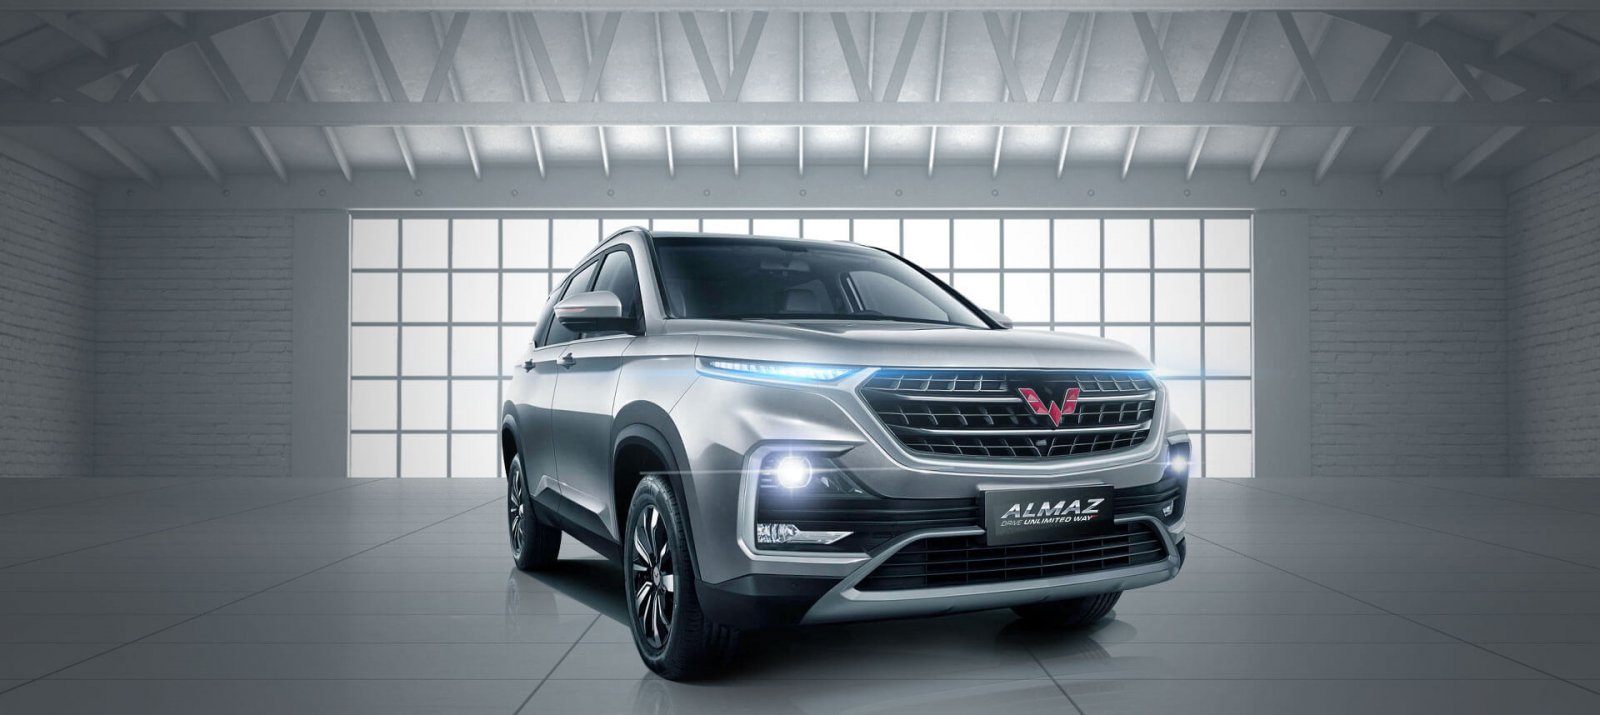 Image 5 Reasons Why Wuling Almaz Must Be in Your Garage